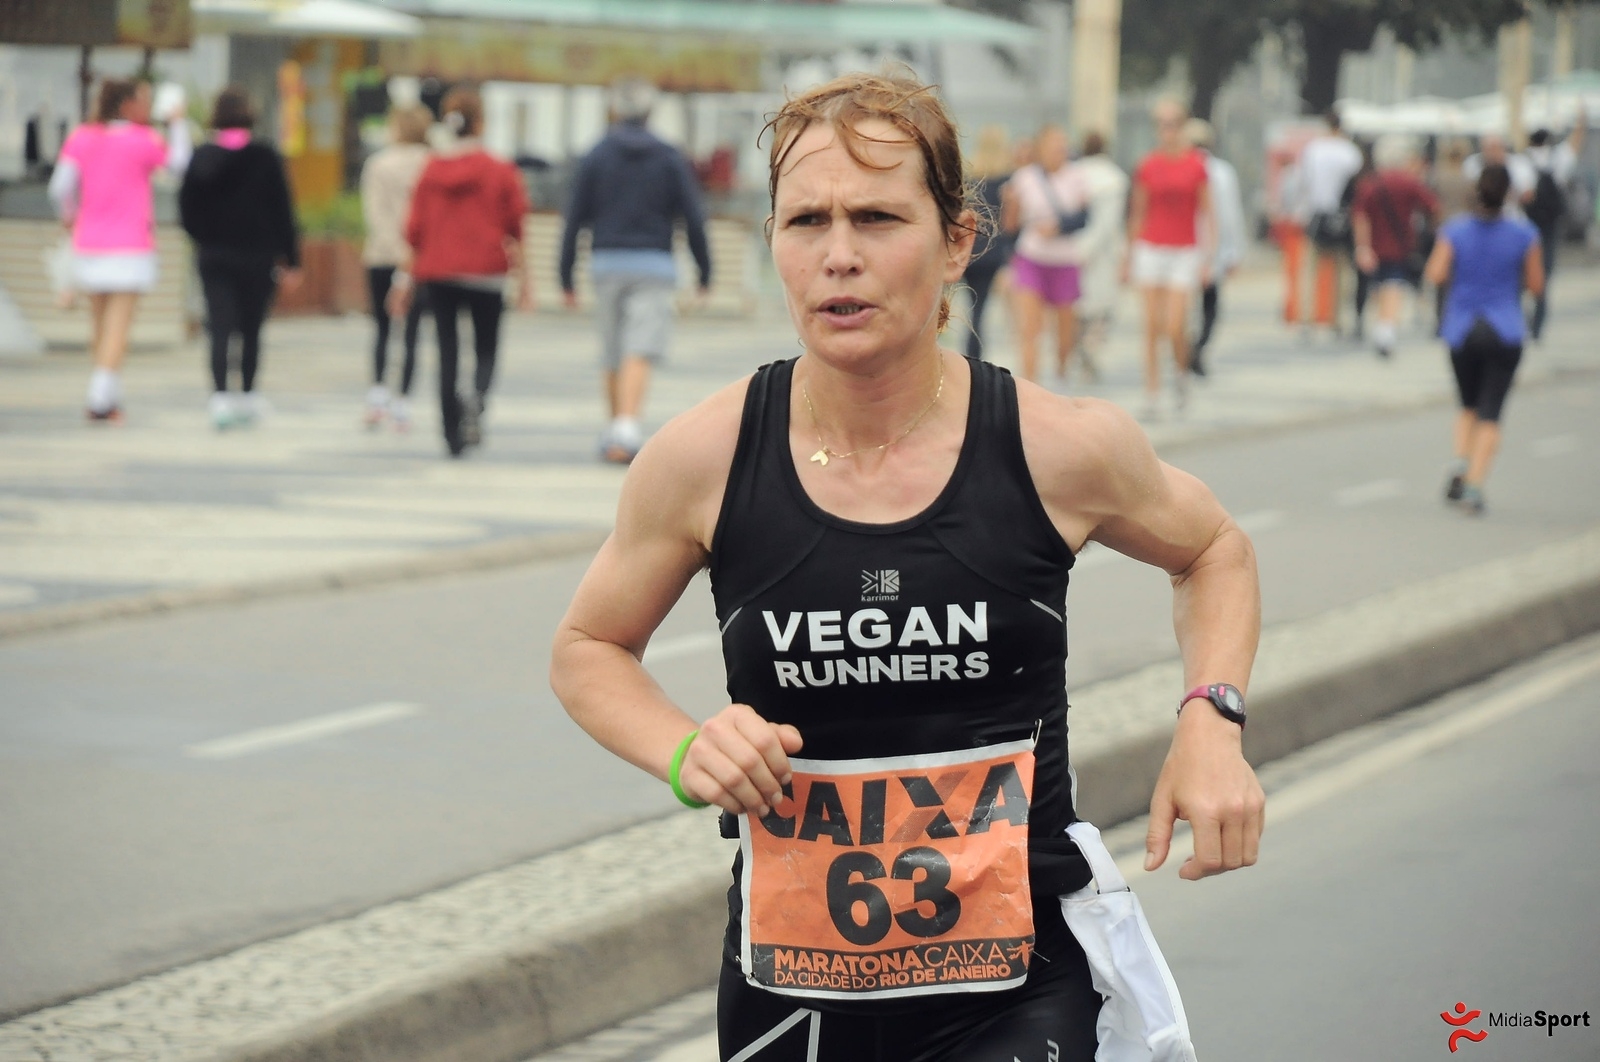 You are currently viewing Vegan Athletes Achieve Greater Endurance than Non-Vegans